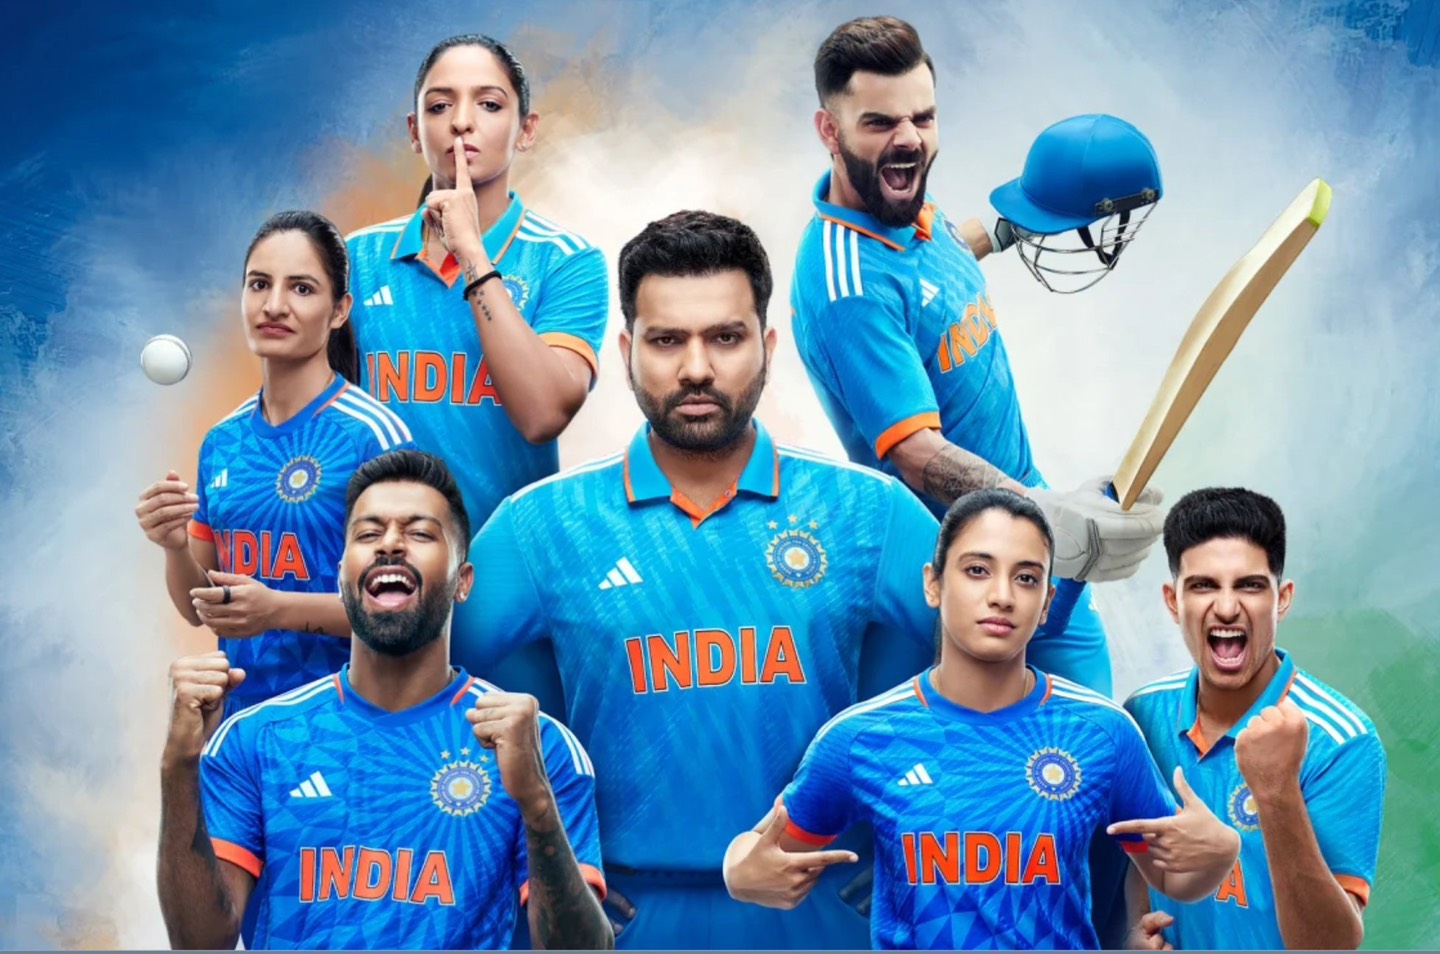 Team India have a new kit sponsor in Adidas | Twitter